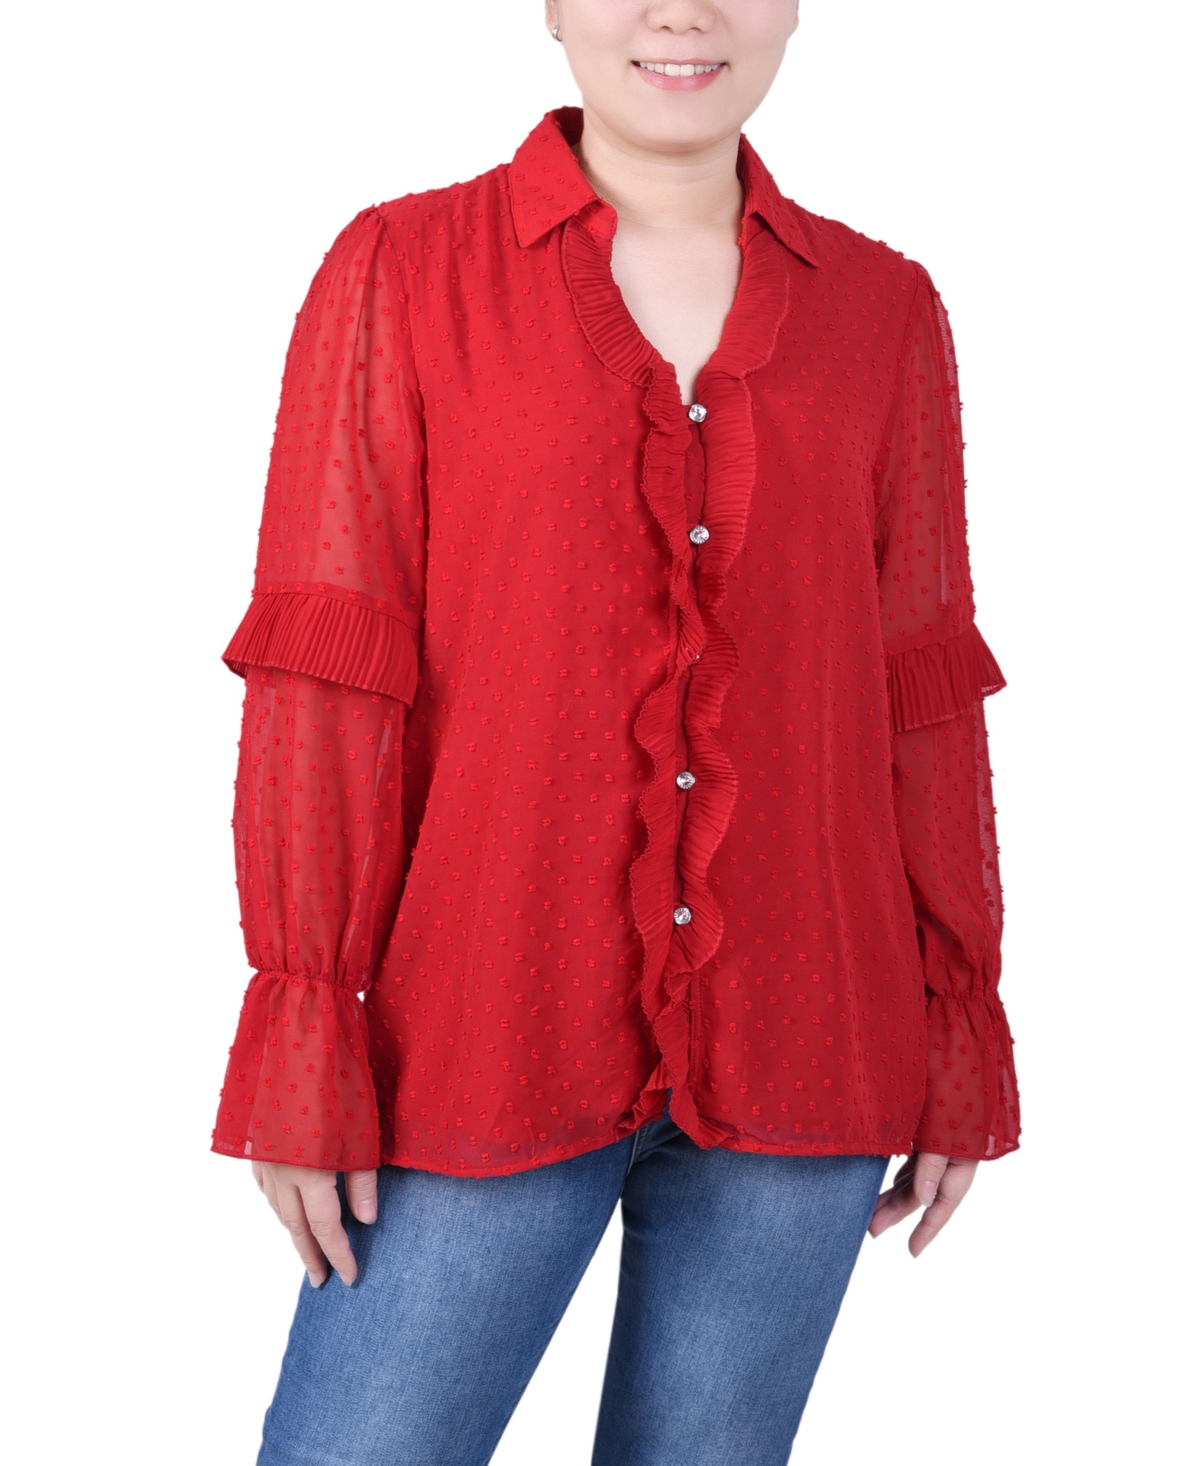 Women's Long Sleeve Dotted Chiffon Blouse - Red